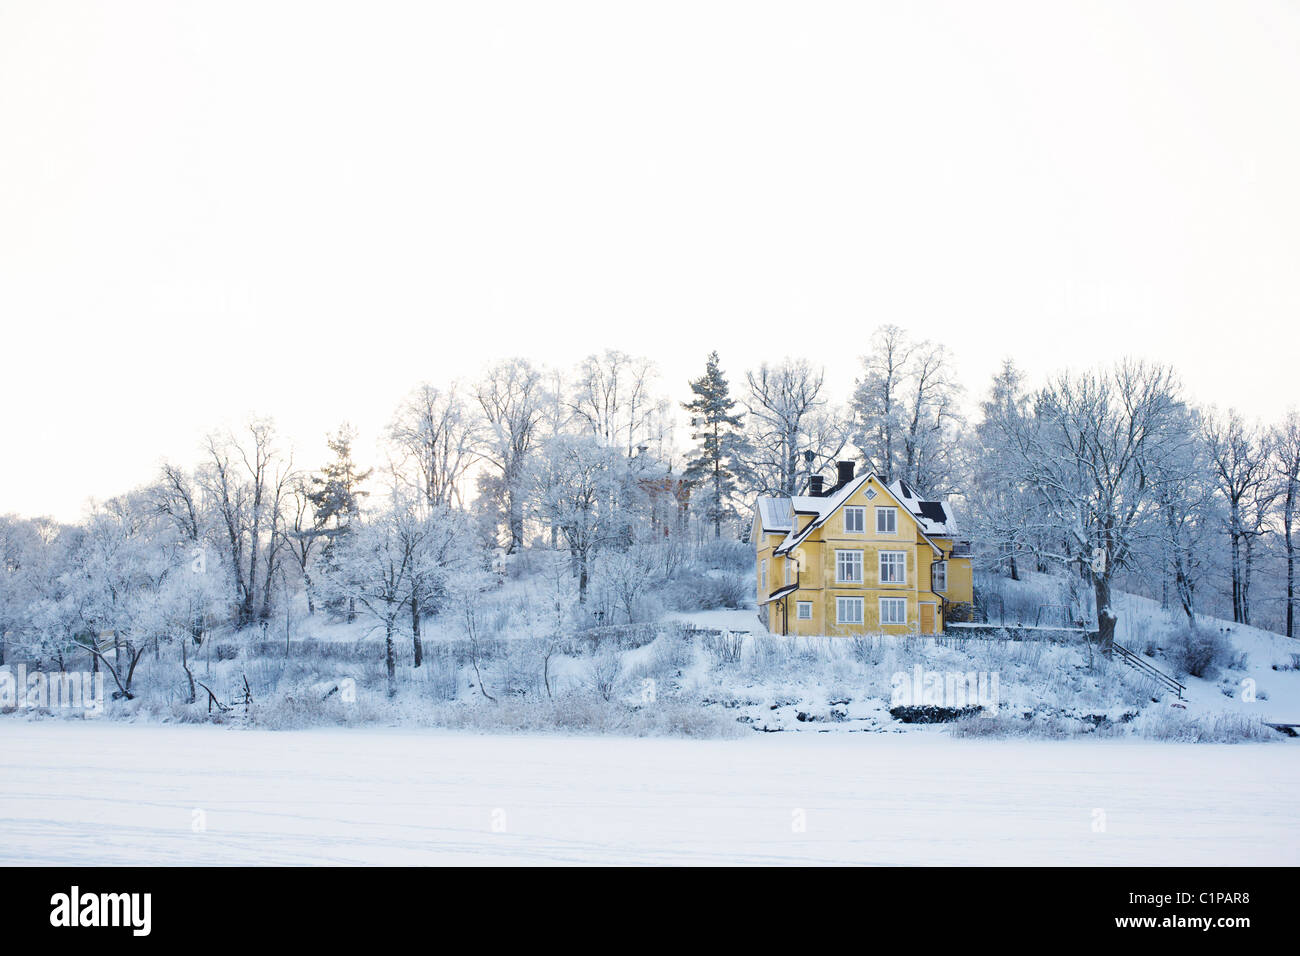 House in snowy landscape Stock Photo